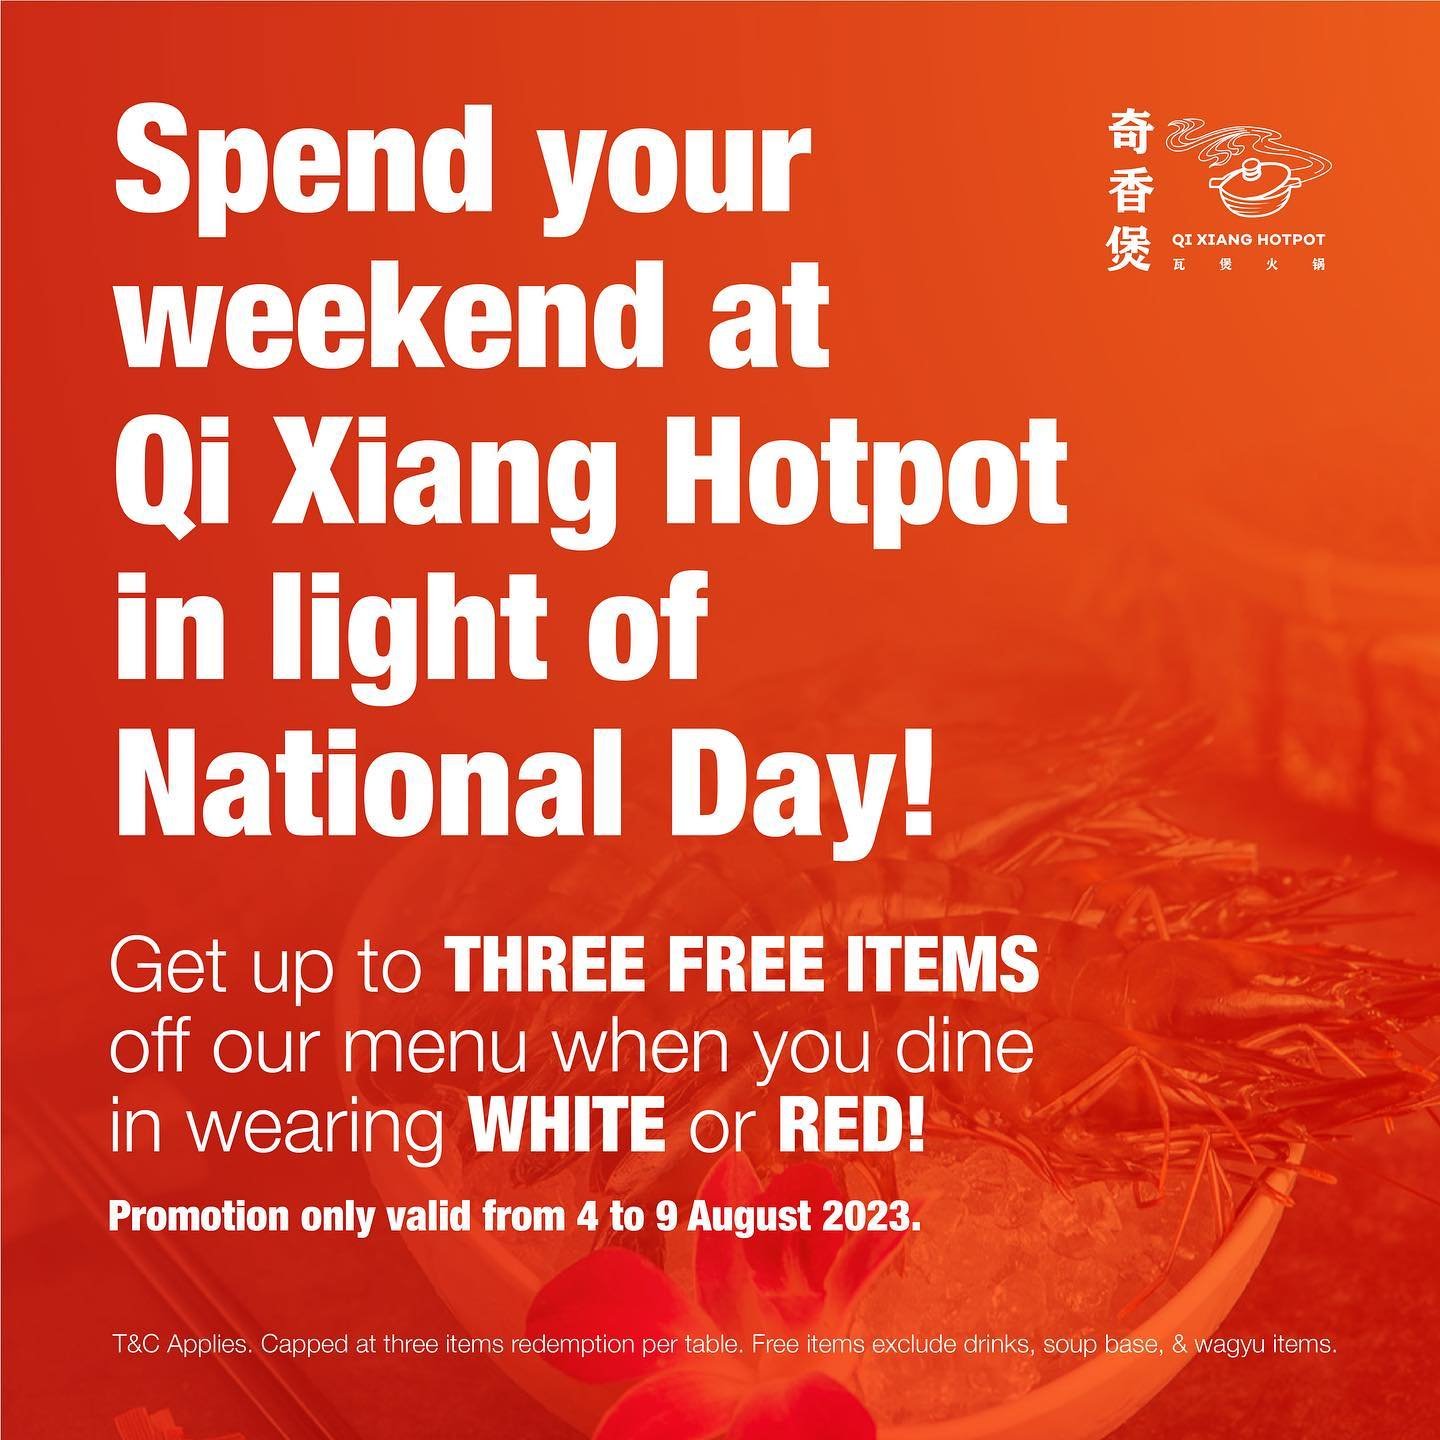 From 4th to 9th August 2023, we are giving away up to 3 FREE ITEMS per table for anyone who comes to dine in wearing white or red!

Bring your friends and loved ones altogether and show some love for our beautiful nation! 1 pax wearing red/white = 1 